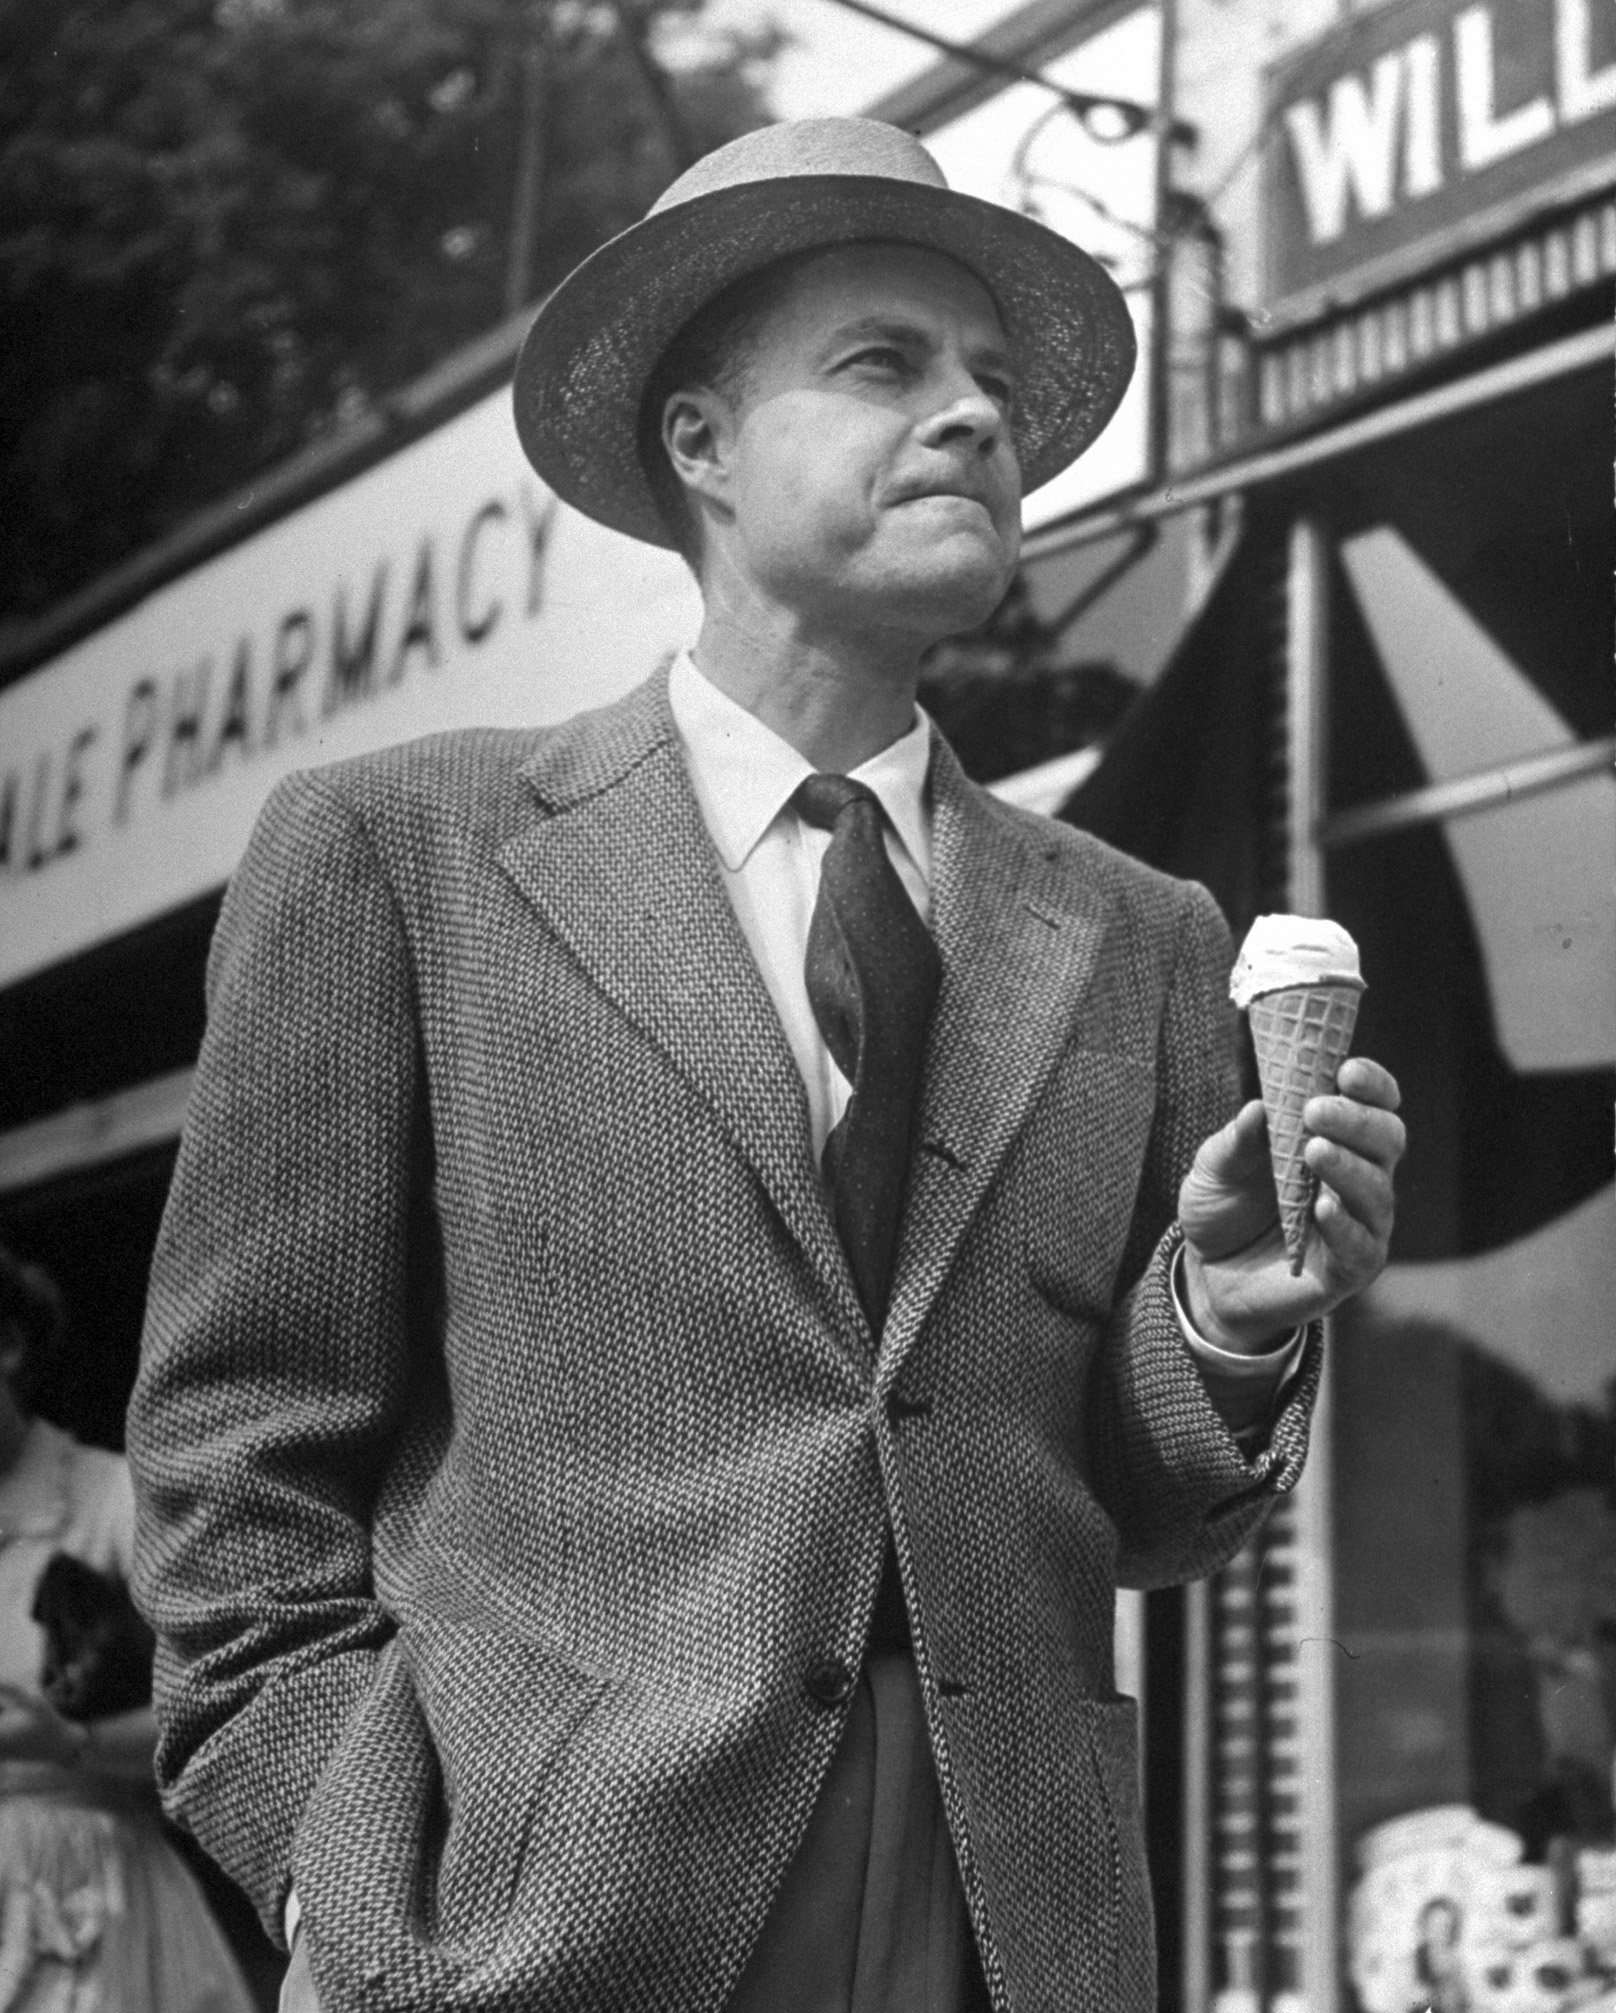 Businessman eating ice cream cone outside a drugstore, 1946.